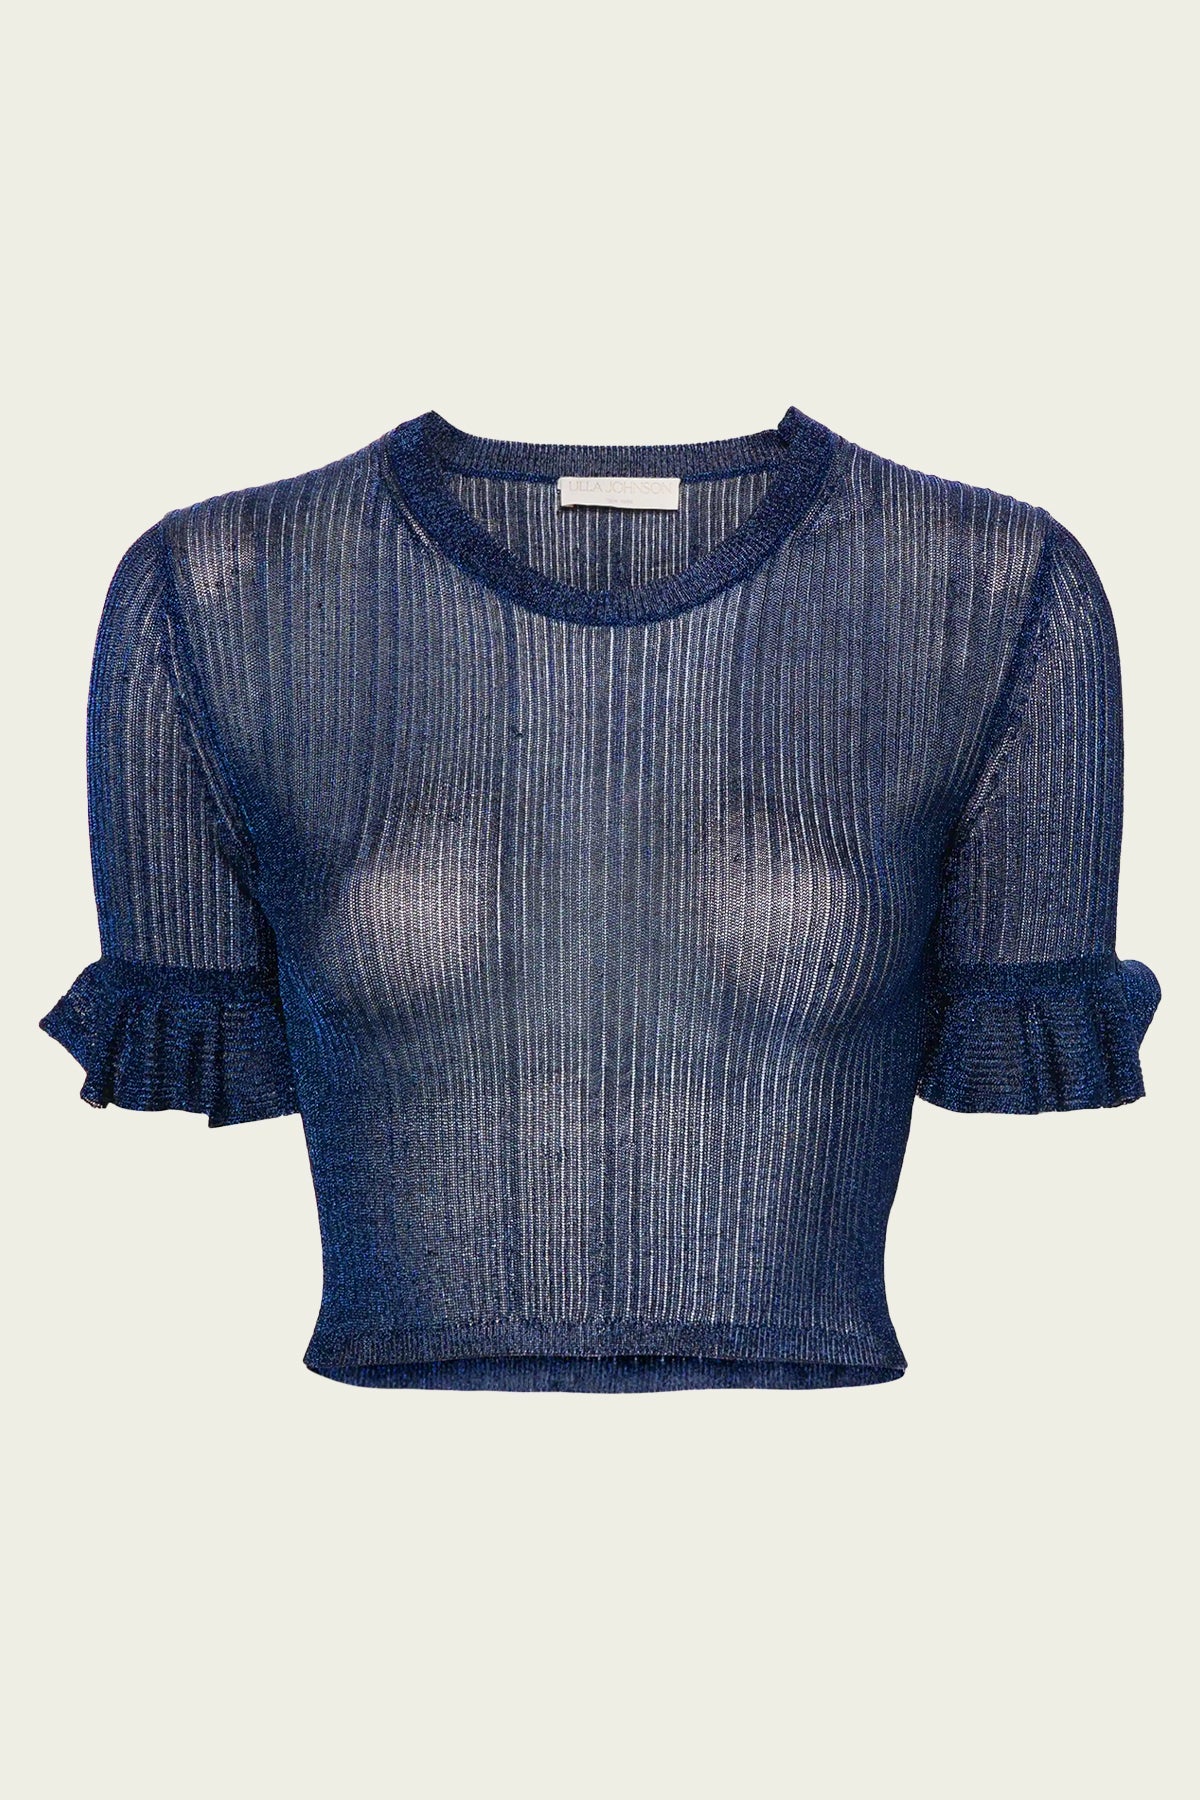 Patti Knitted Crop Top in Midnight - shop-olivia.com